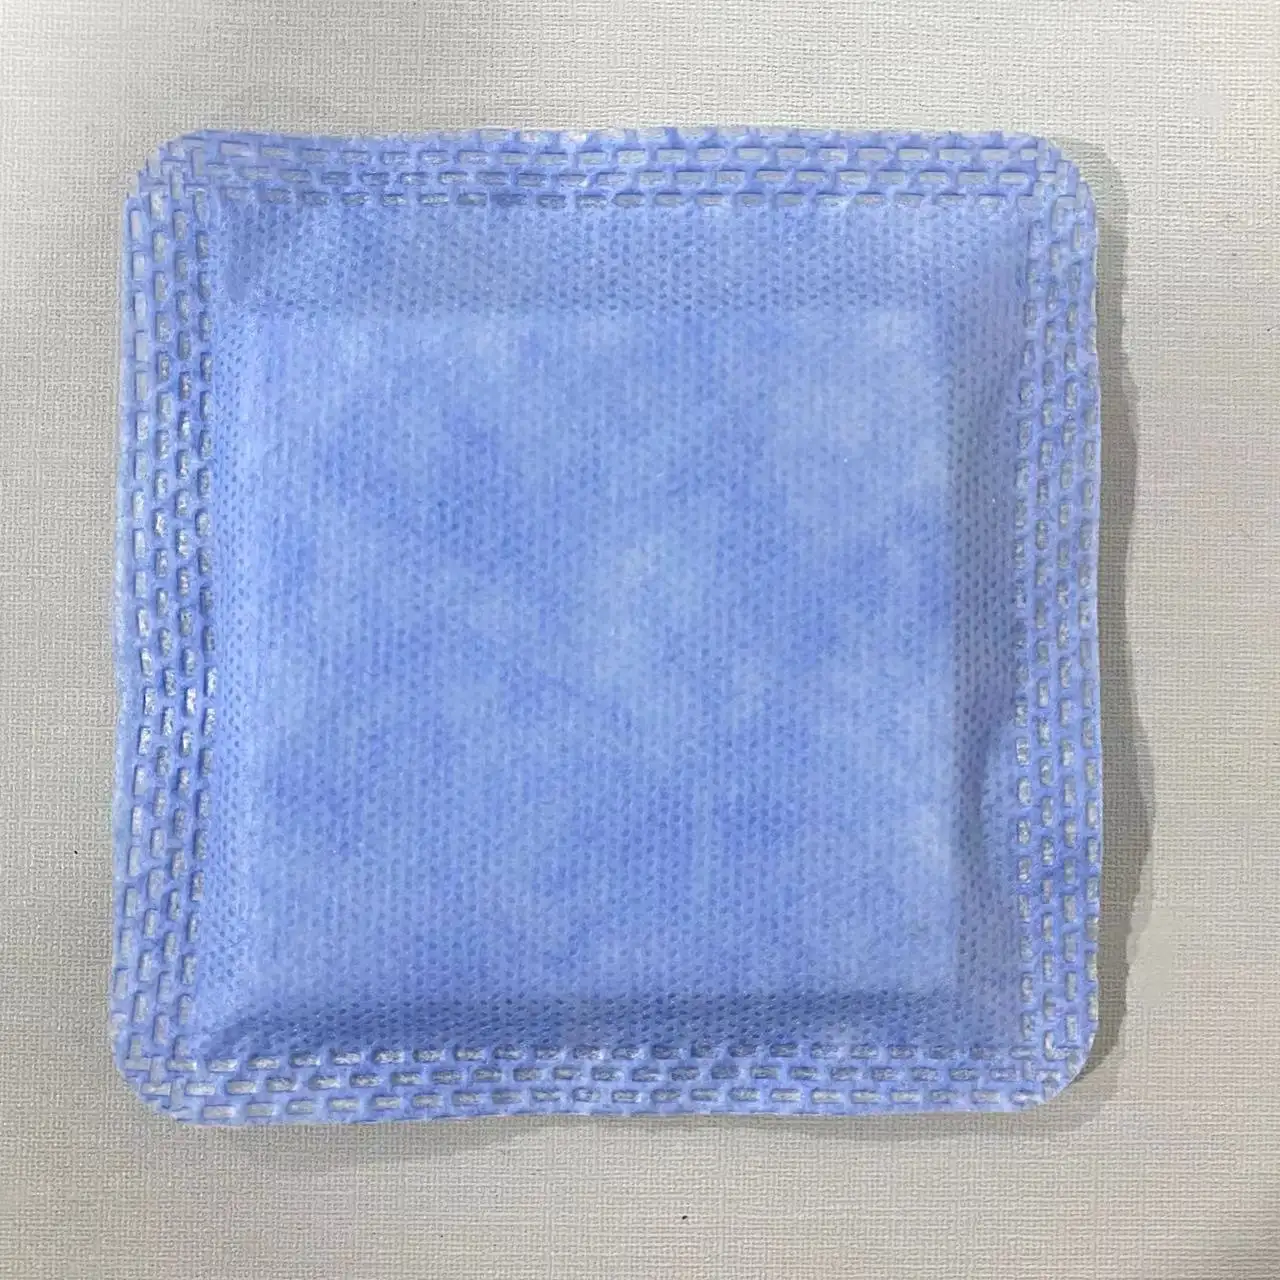 Super Absorbent Dressing For Wound Care Highly Exudating Self Adhesive